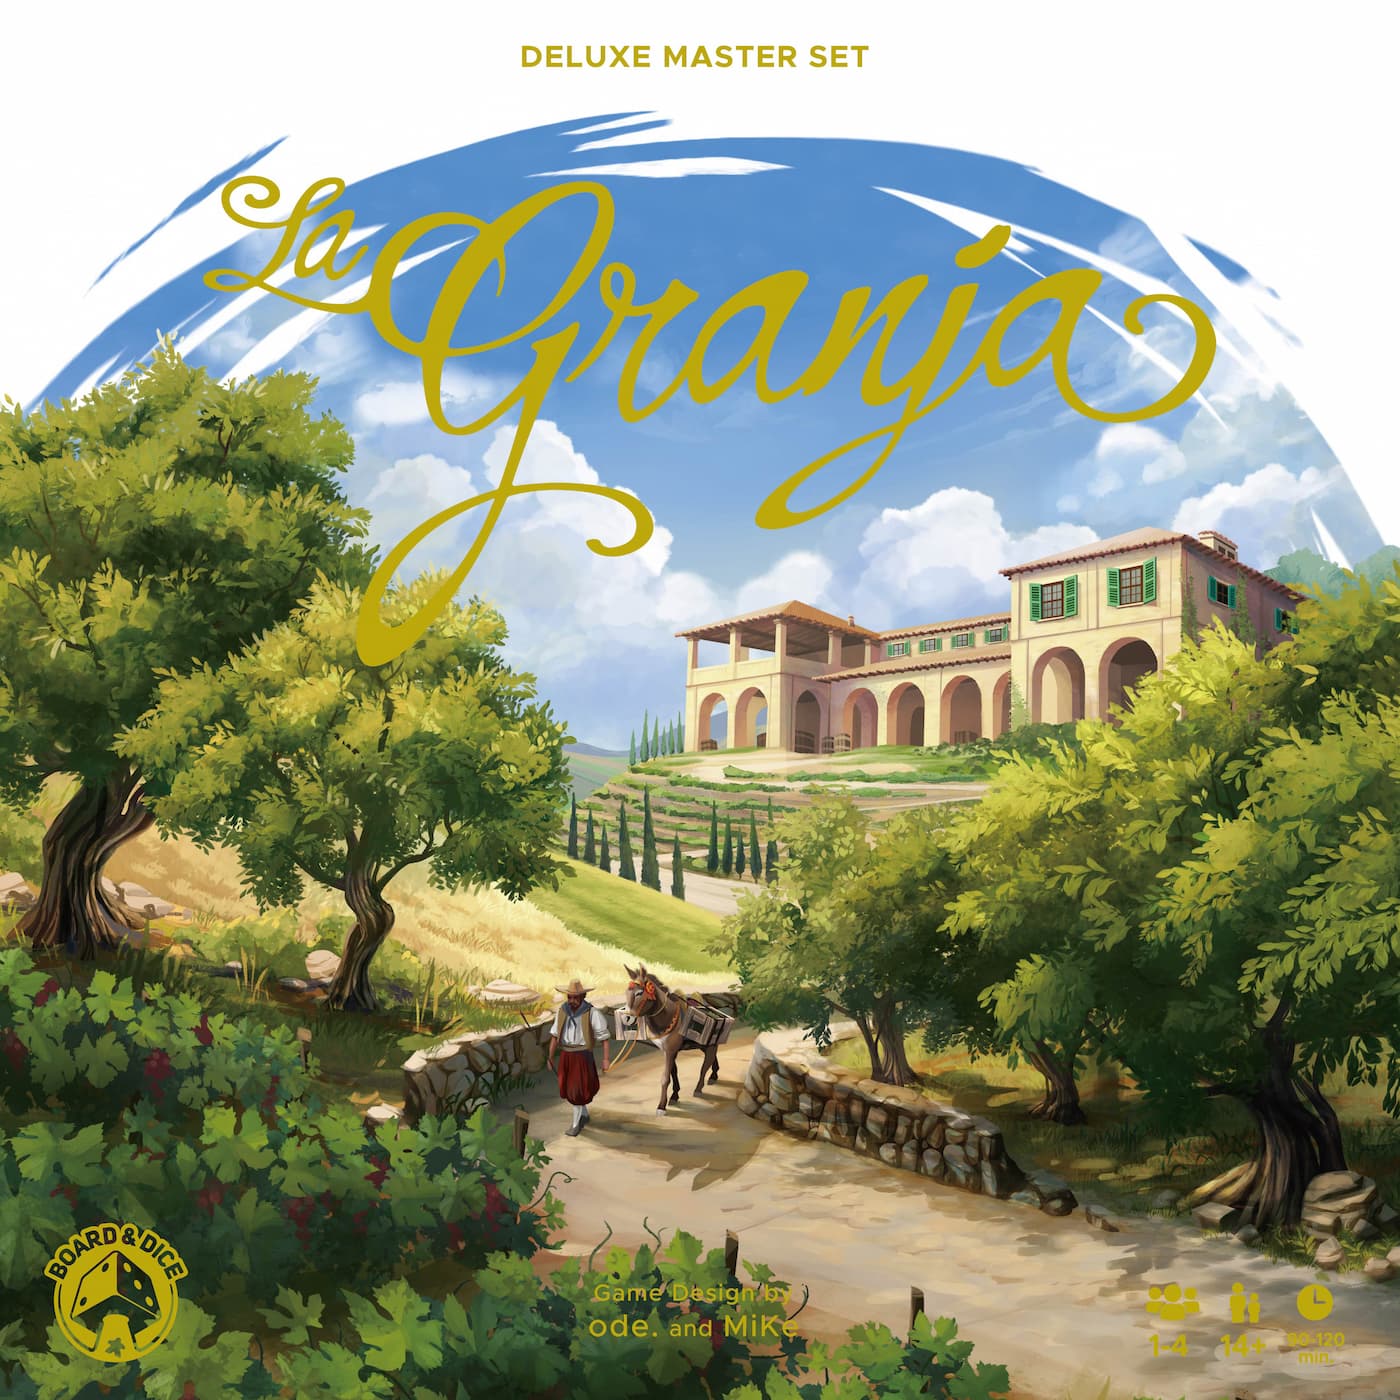 La Granja Deluxe Master Set the board game was manufactured by Boda Games Manufacturing.